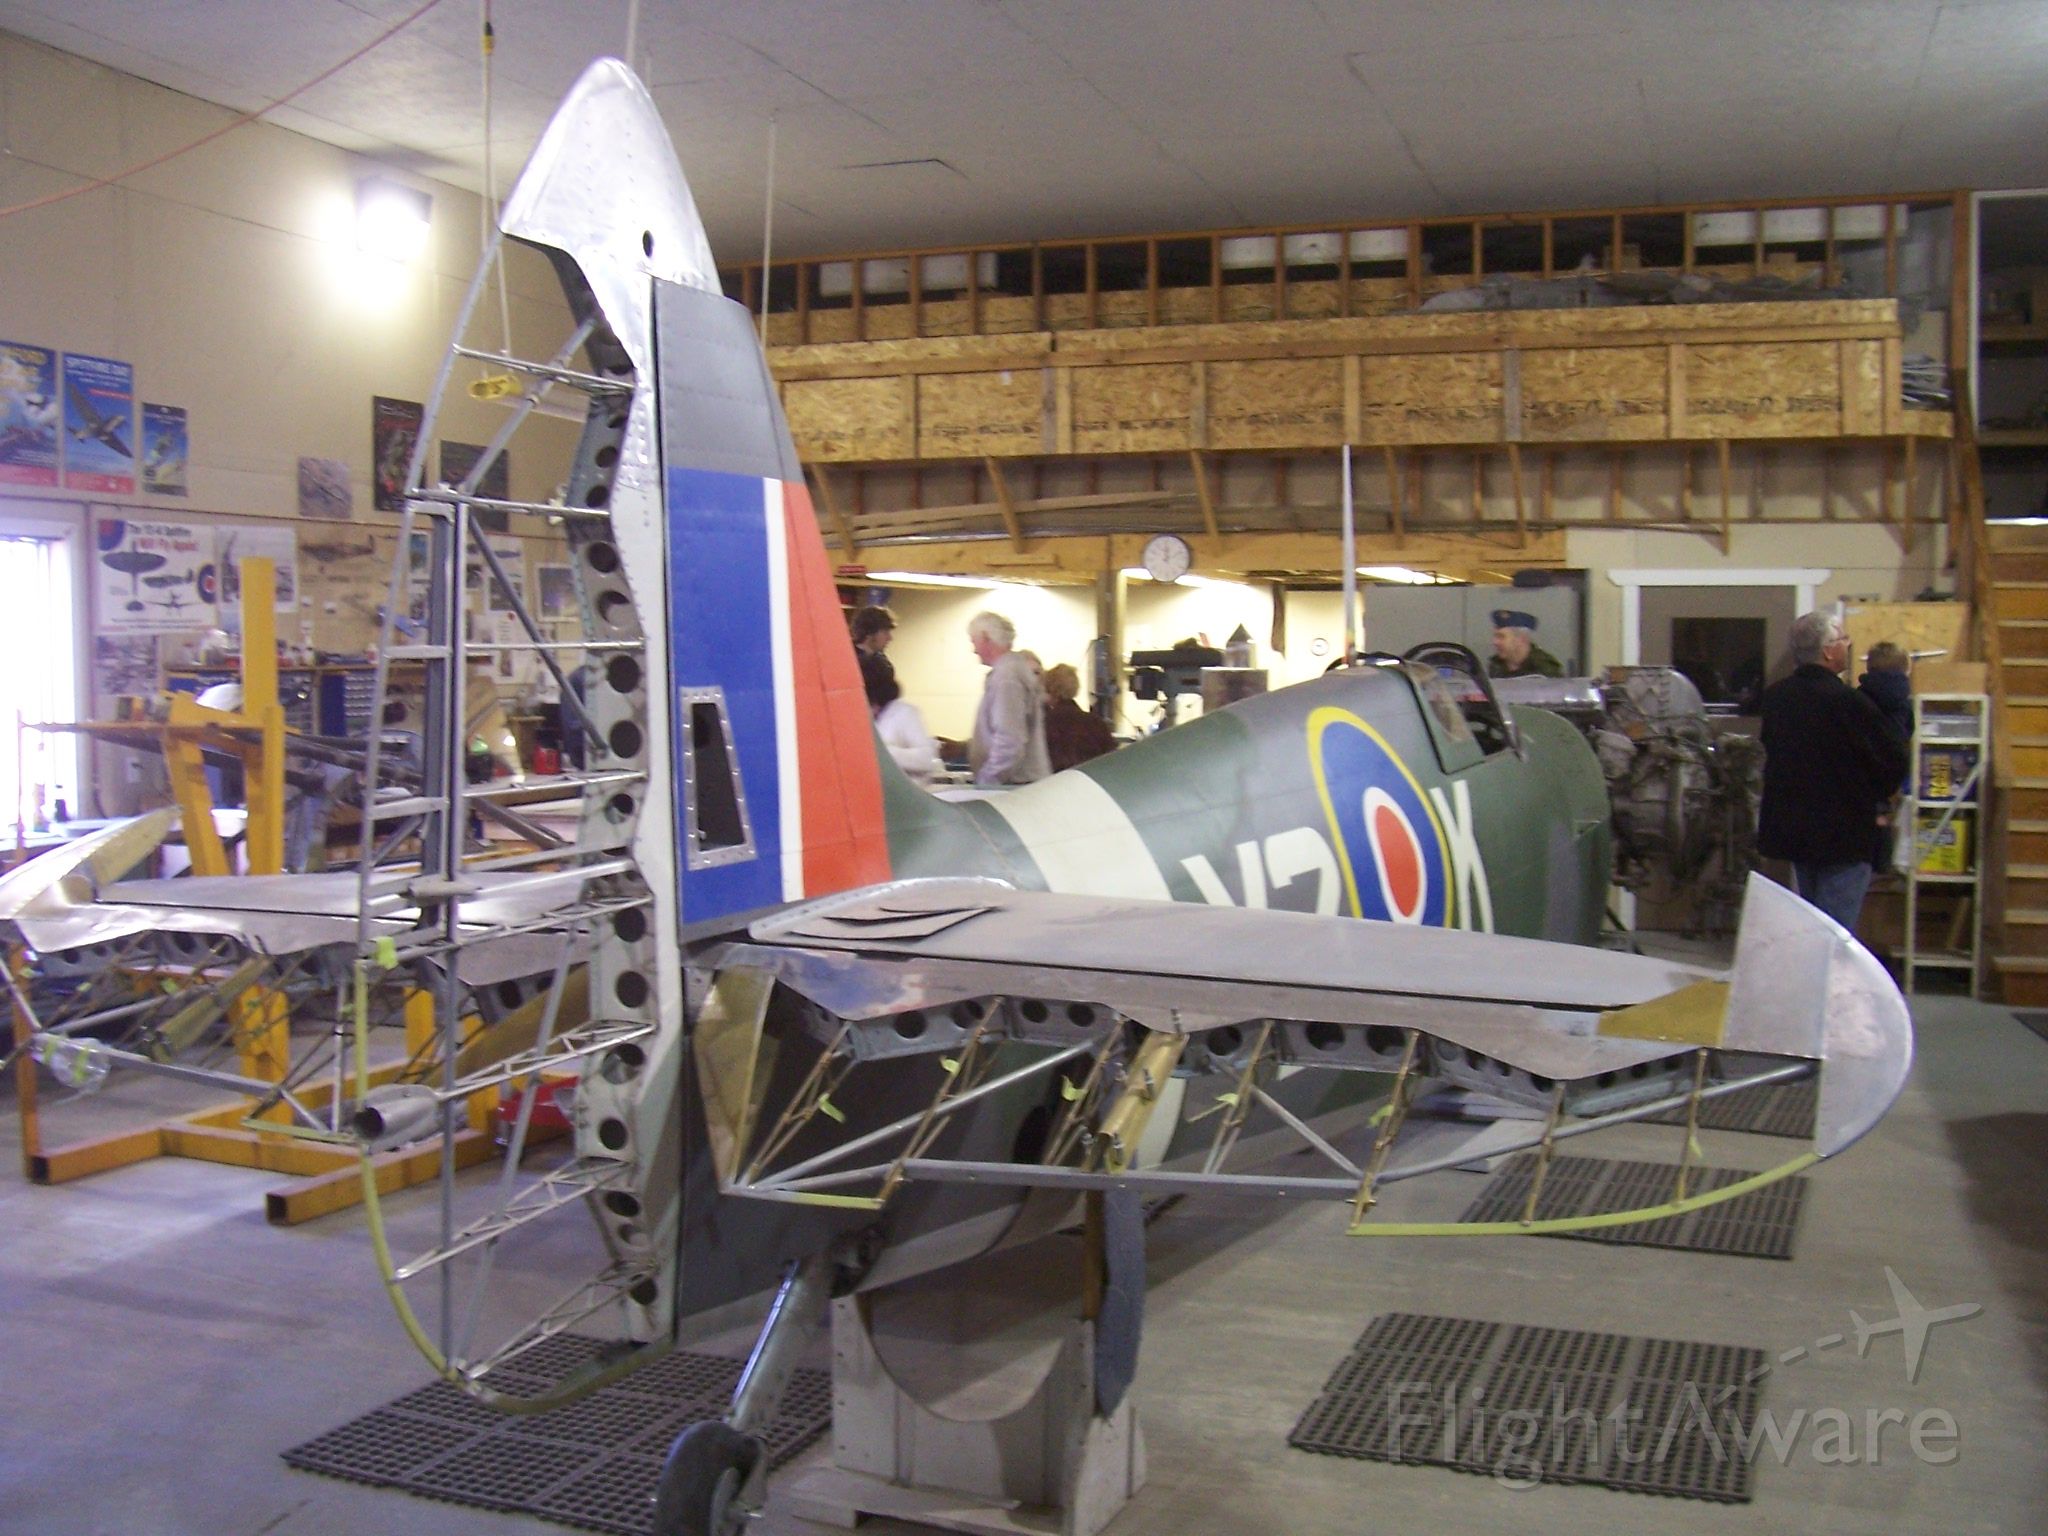 SUPERMARINE Spitfire (LIL294) - Y2K - Spitfire Restoration  CFB Comox 442 Sqn.  Supermarine Spitfire Mk IXc TE294    Between 1937 and 1948 5,665 Mark IX versions were produced  Total production of all models  22,742 - not to many left -  especially airworthy specimines  This one will fly again possibly as early as 2012    This air frame was originaly salvaged in south Africa  after service with the SA Airforce from 1947 to 1952    Wing span 36 ft. 10 in.  Fusalage Length 31 ft  12 ft. 8 in. in hight to the  tip of the 3 blade prop  Combat Weight 7,500 lbs